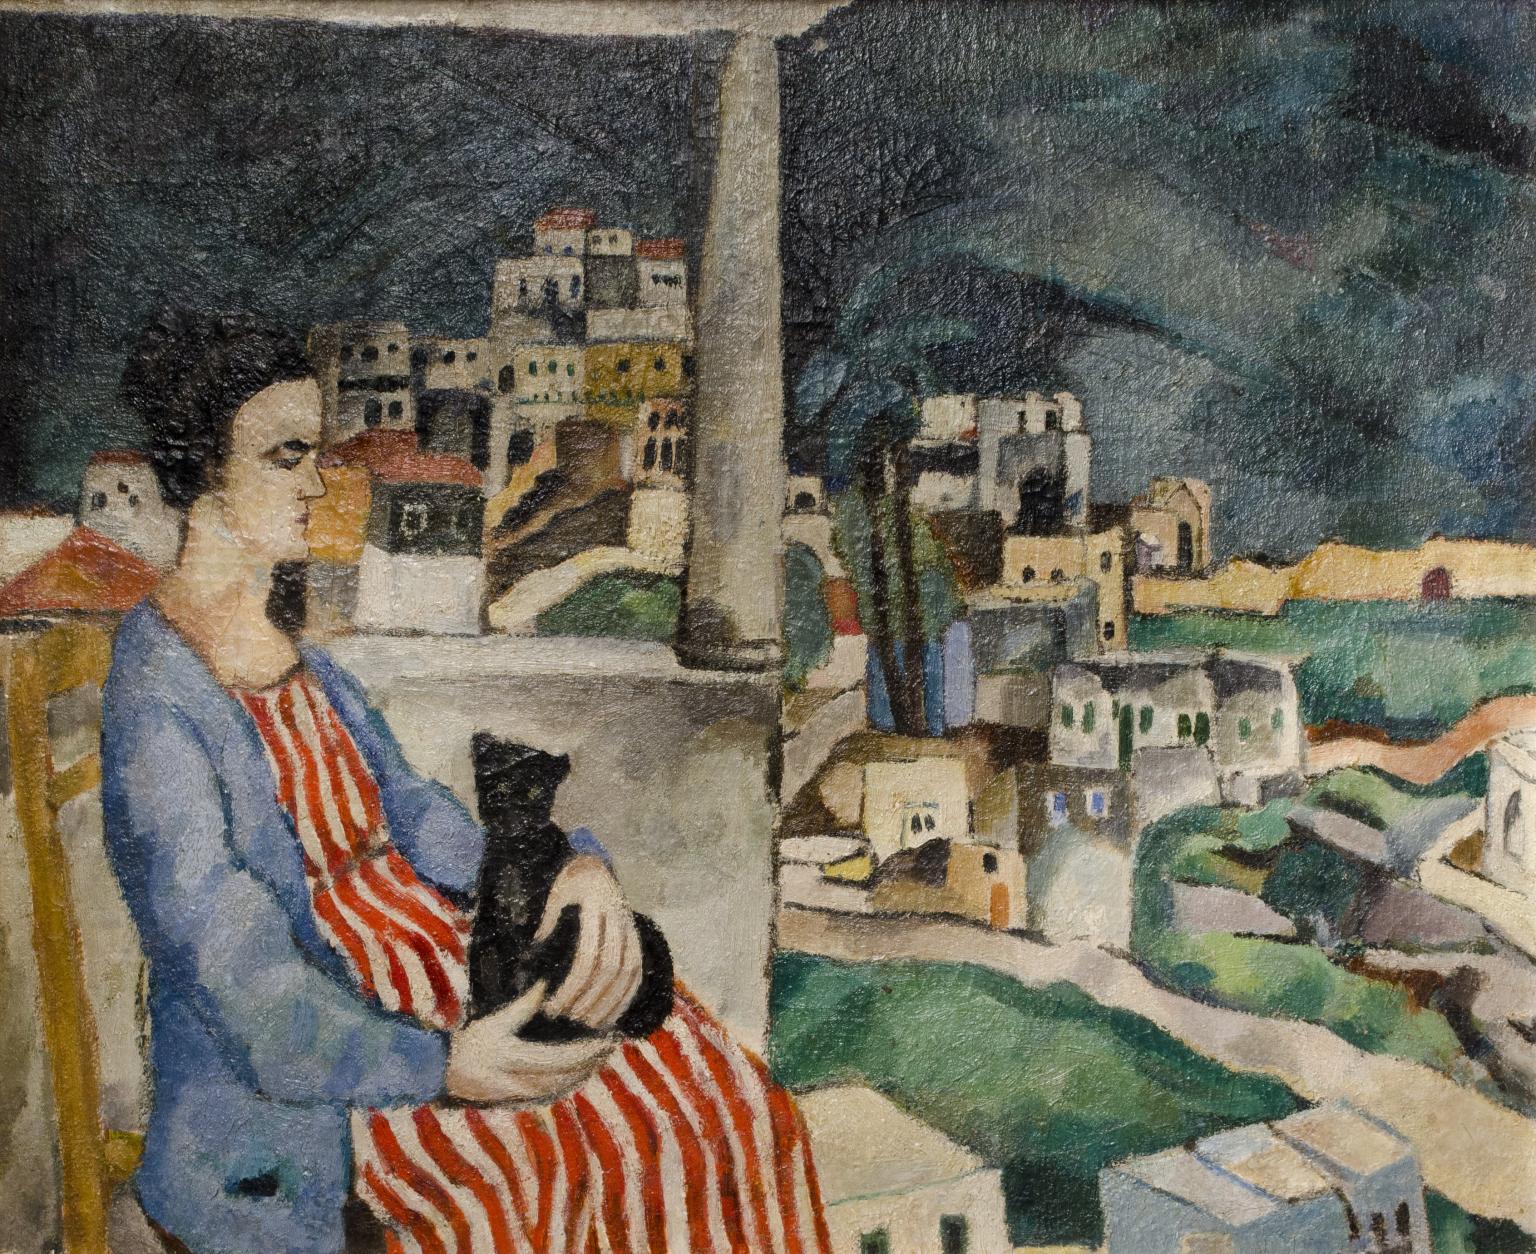 Painting of woman sitting on balcony with cat in her lap overlooking the city.